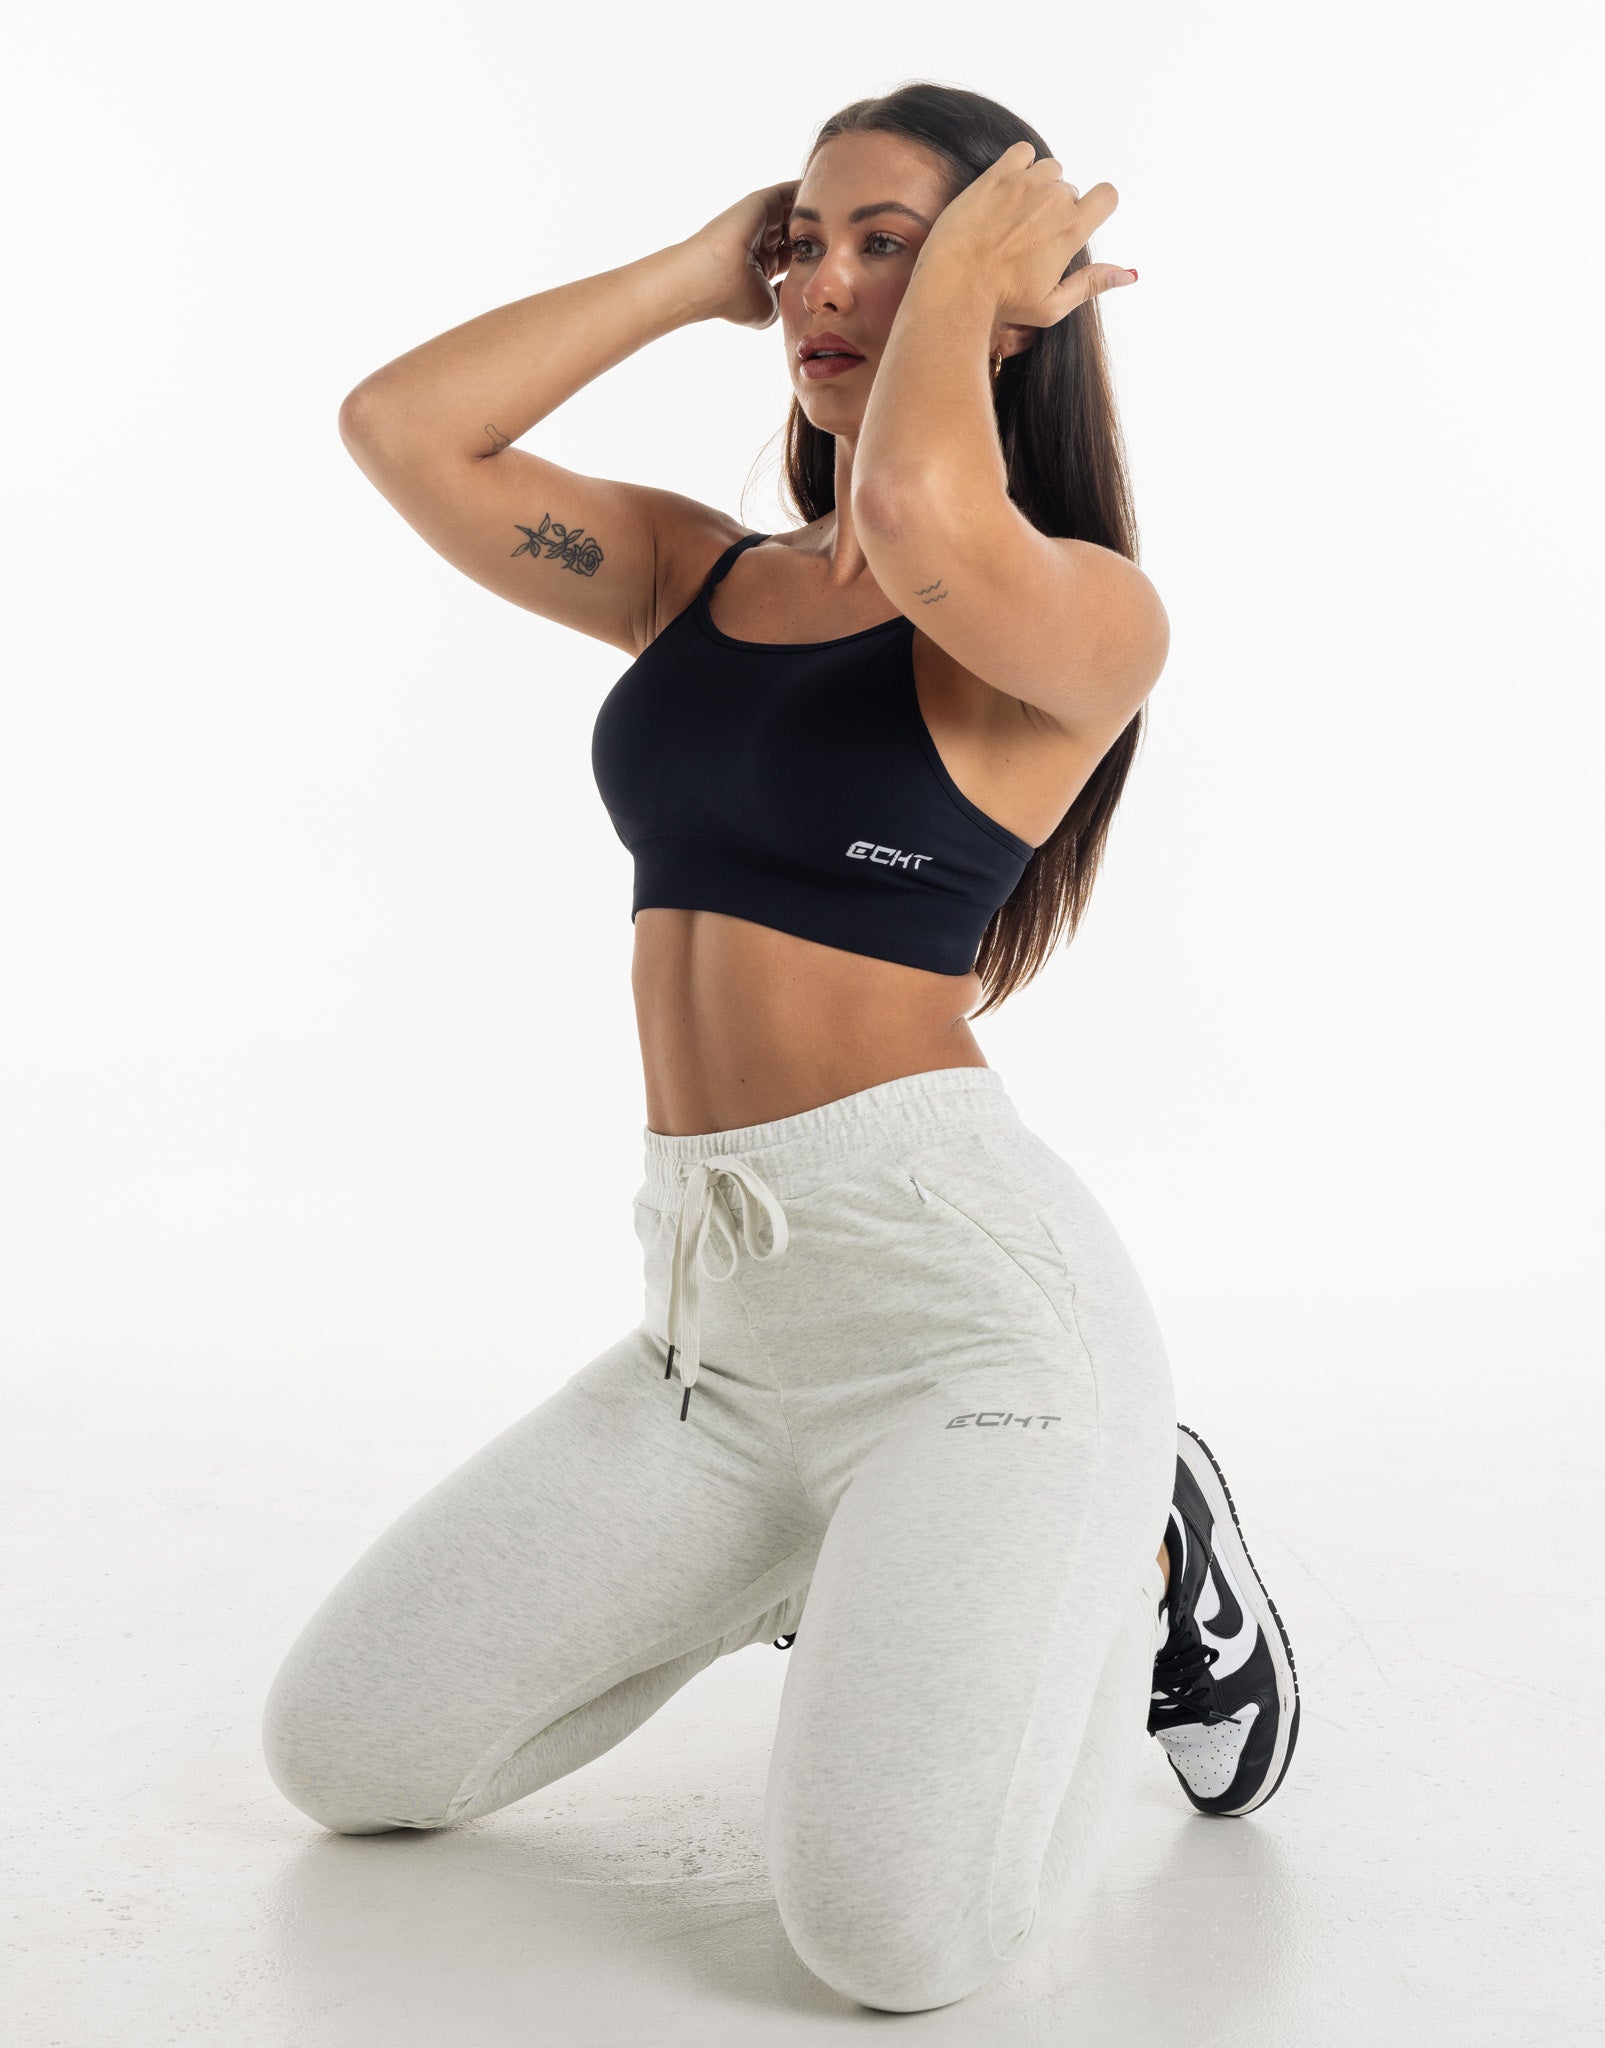 Ladies Tapered Joggers V2 - Heather Grey